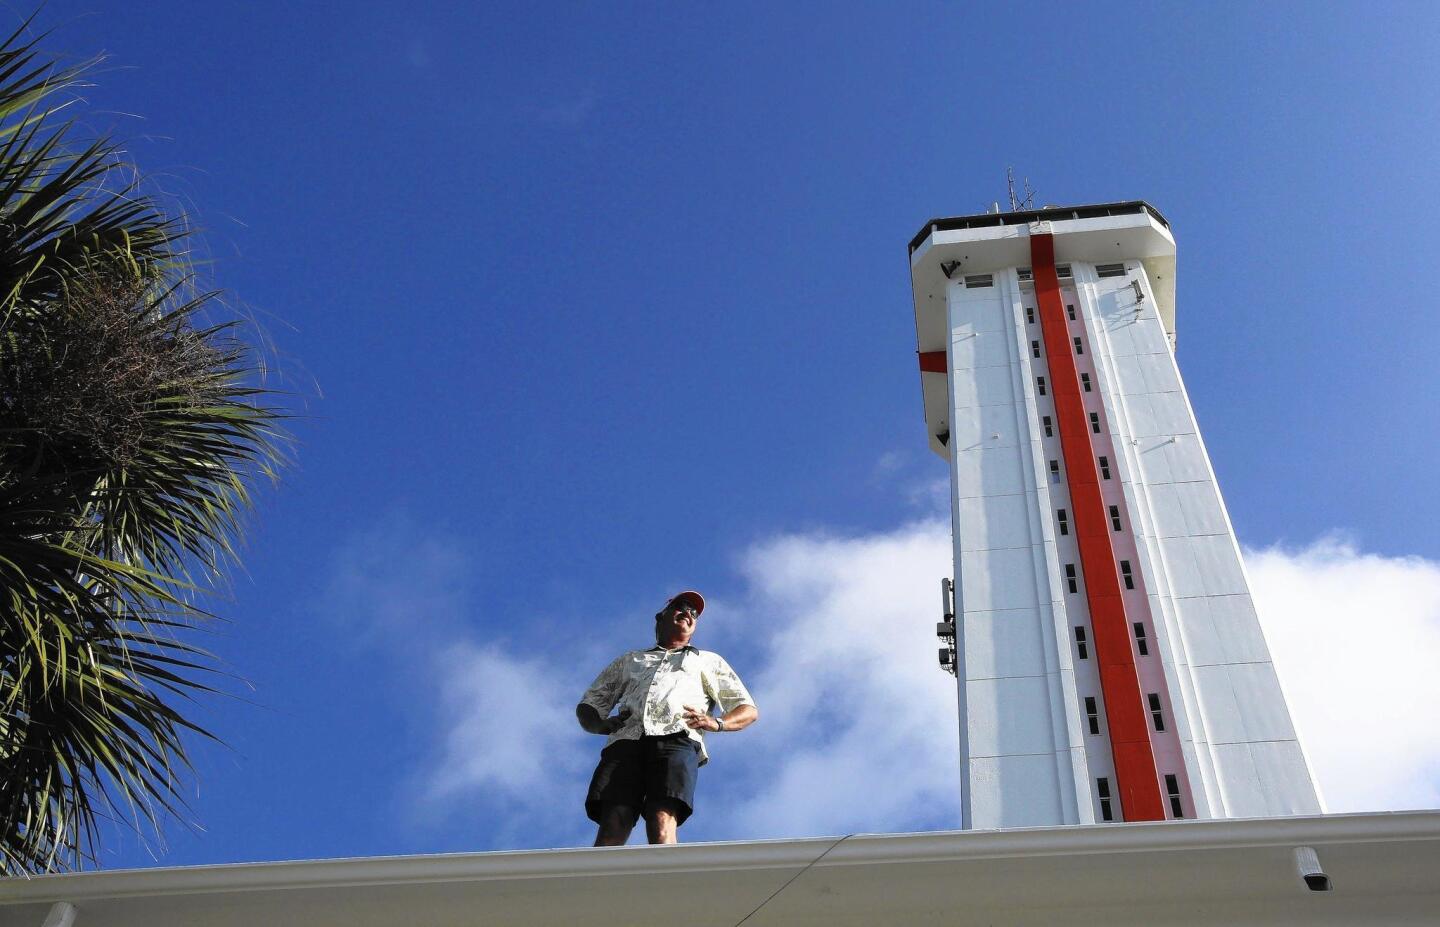 The Citrus Tower, a Clermont landmark built in 1955, is getting fresh paint for the first time in 20 years. Greg Homan, owner since 1995, is pictured by the tower on Tuesday, April 14, 2015. Tom Benitez/Orlando Sentinel